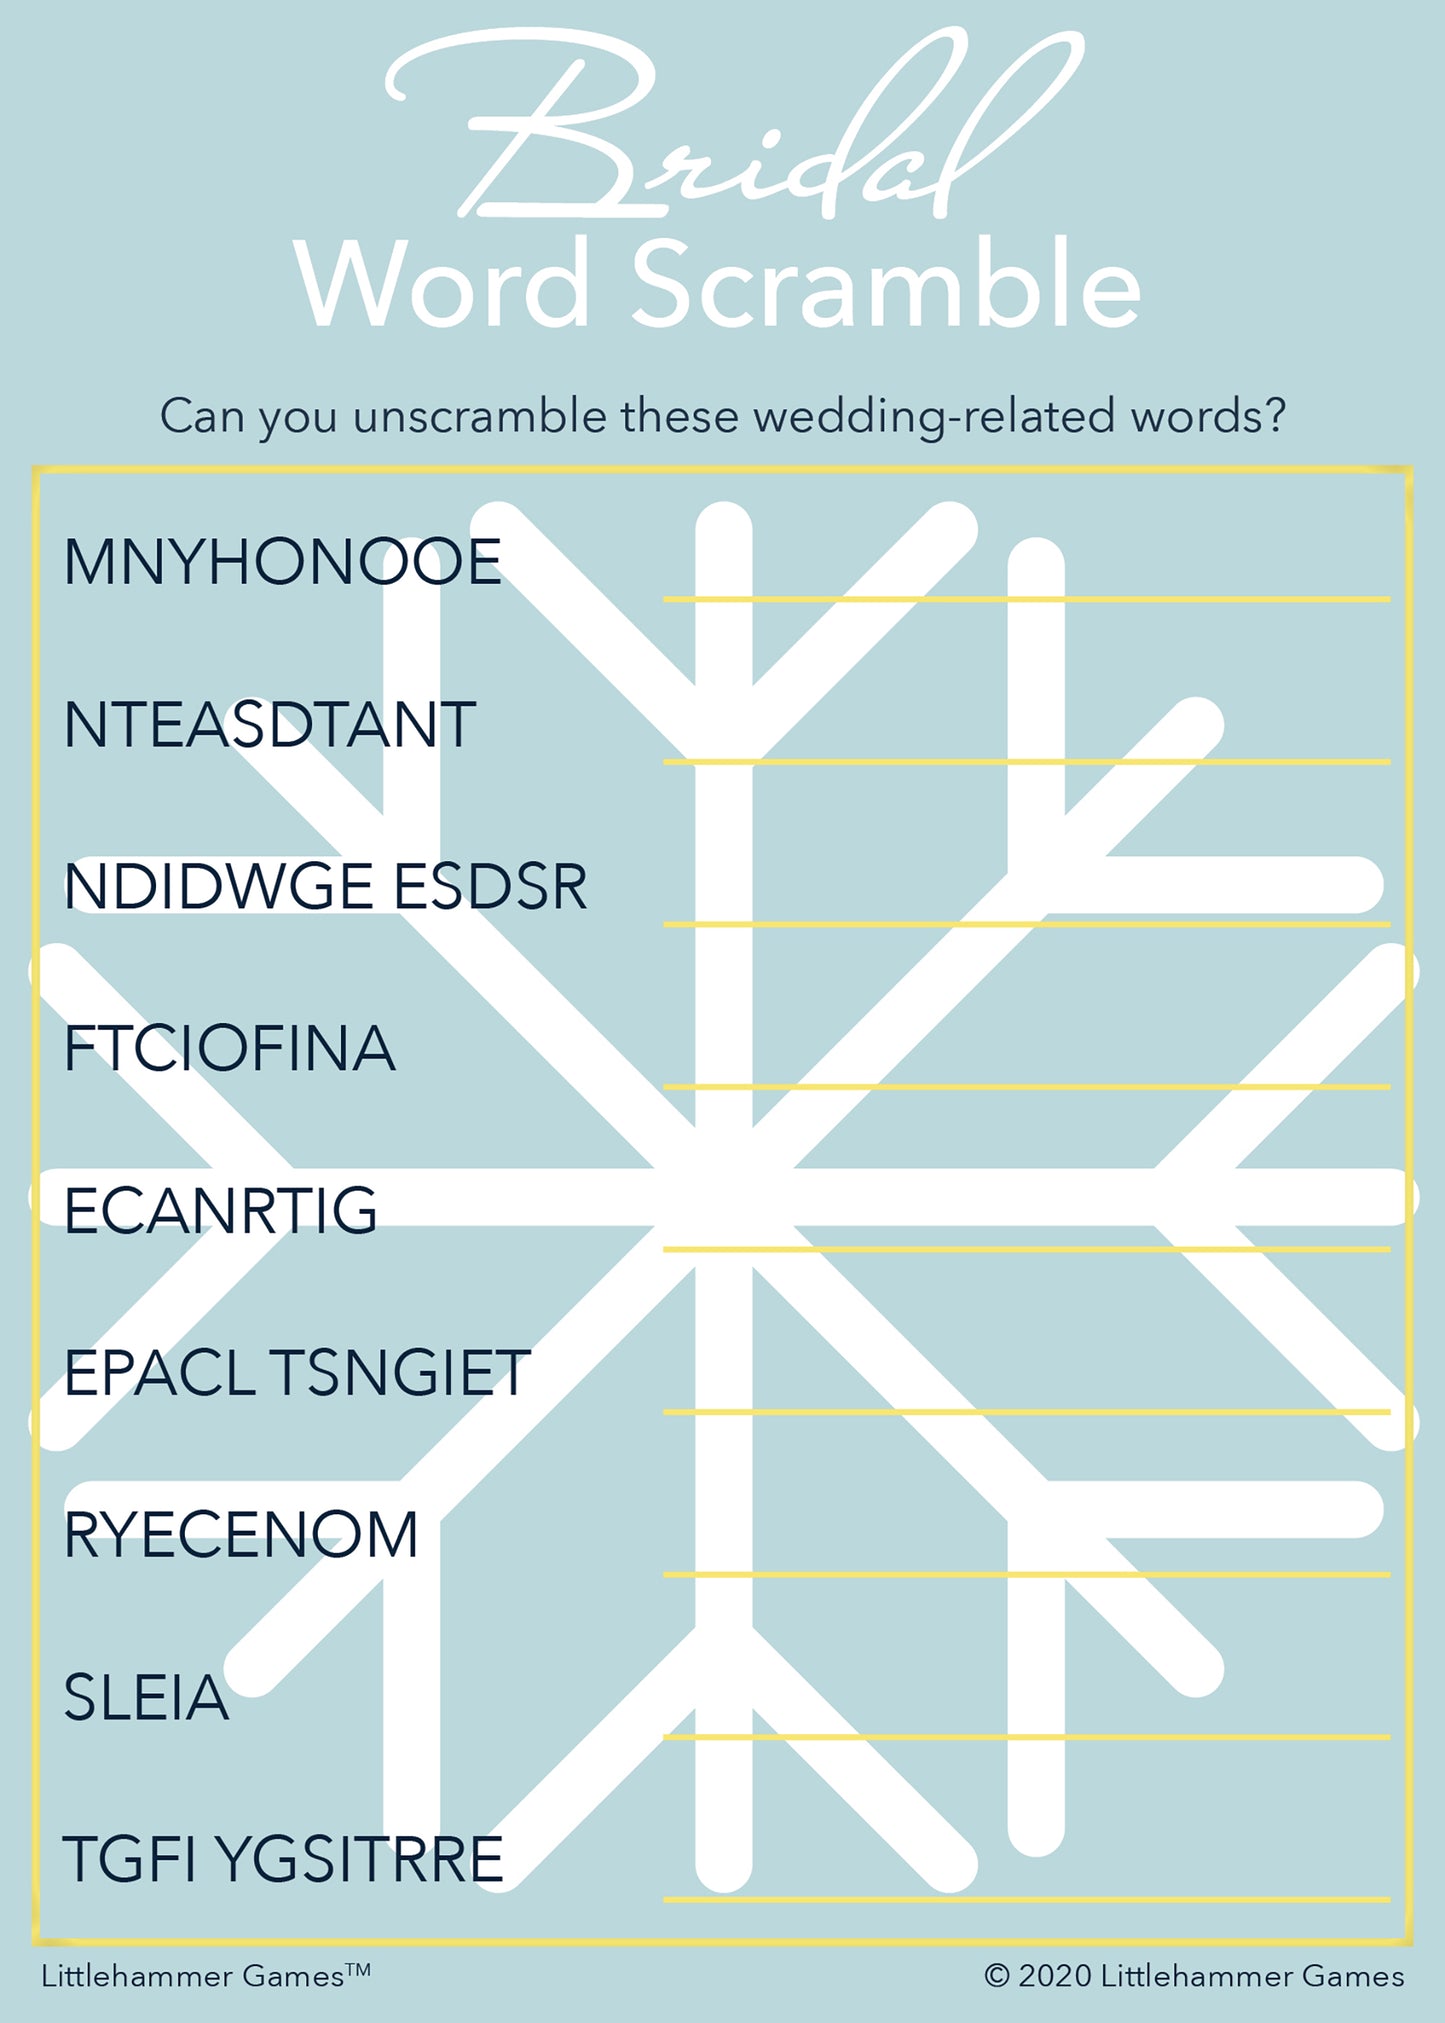 Bridal Word Scramble game card with a snowflake background